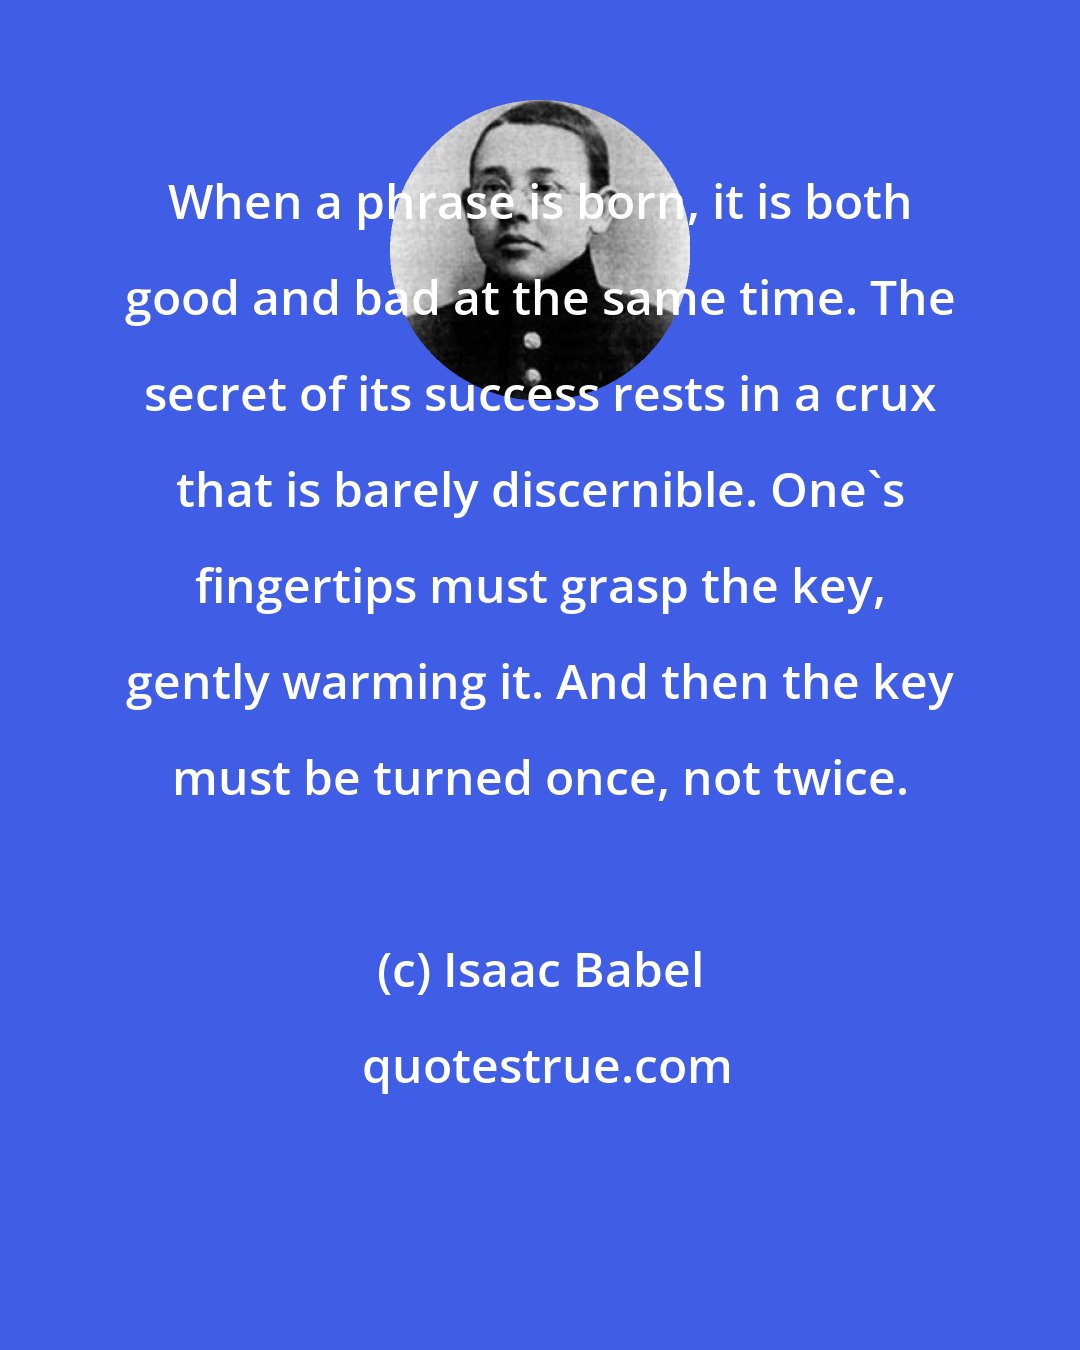 Isaac Babel: When a phrase is born, it is both good and bad at the same time. The secret of its success rests in a crux that is barely discernible. One's fingertips must grasp the key, gently warming it. And then the key must be turned once, not twice.